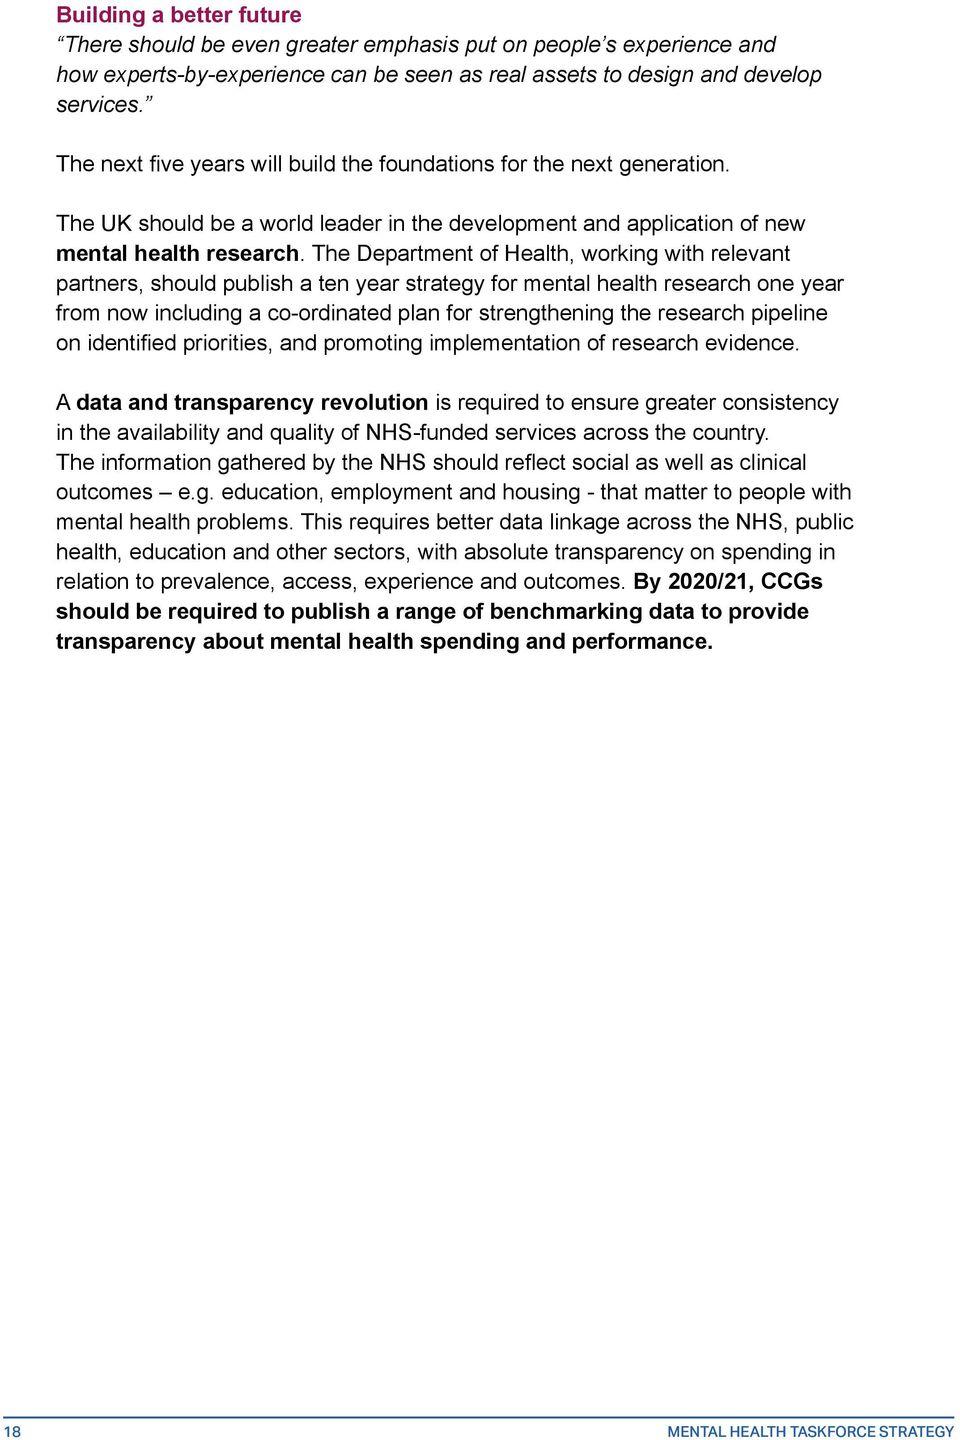 The Department of Health, working with relevant partners, should publish a ten year strategy for mental health research one year from now including a co-ordinated plan for strengthening the research